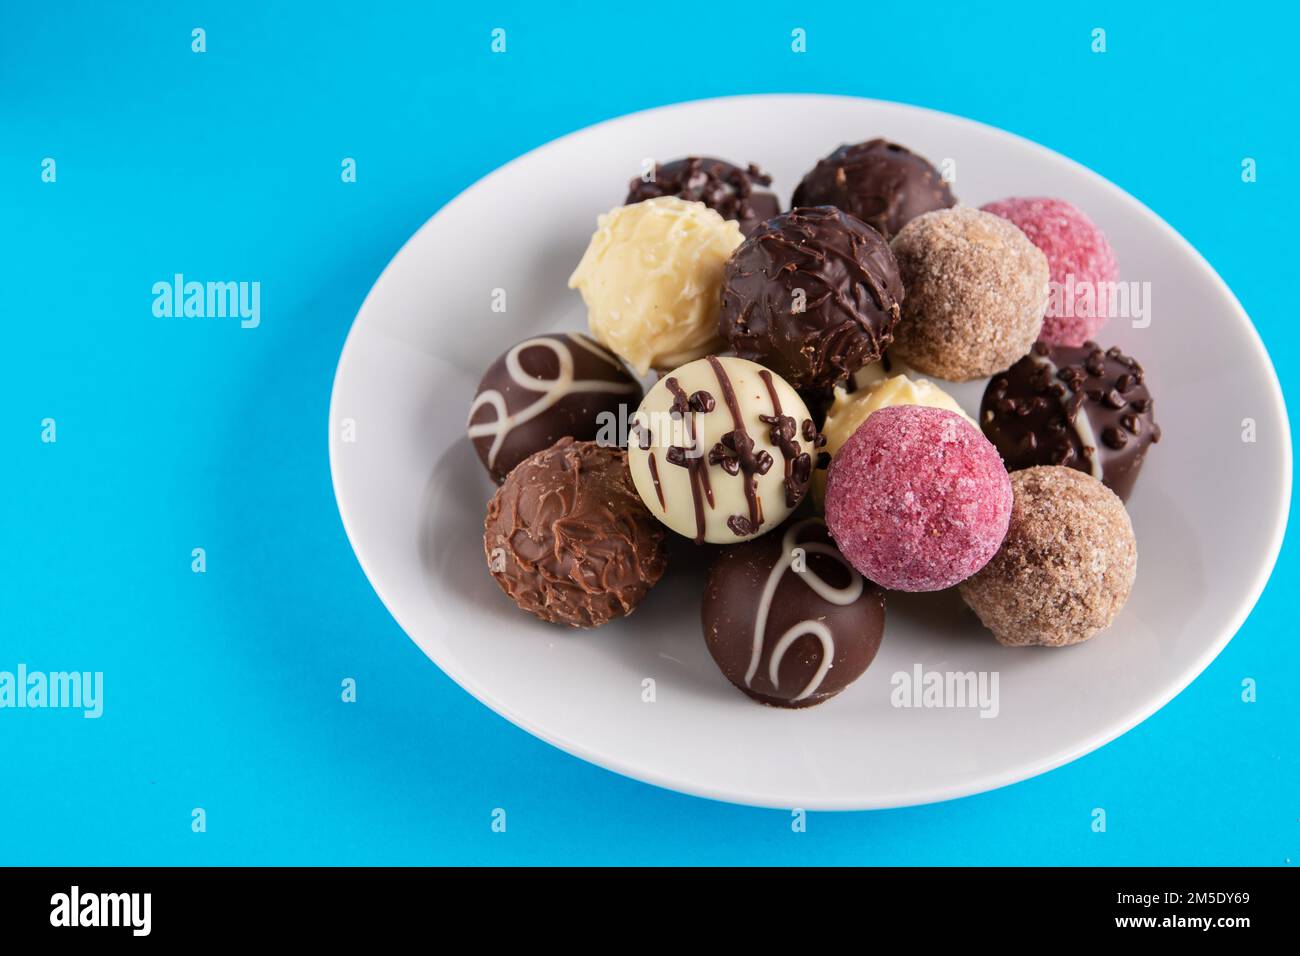 photo round chocolate candies on a plate on a blue background Stock Photo